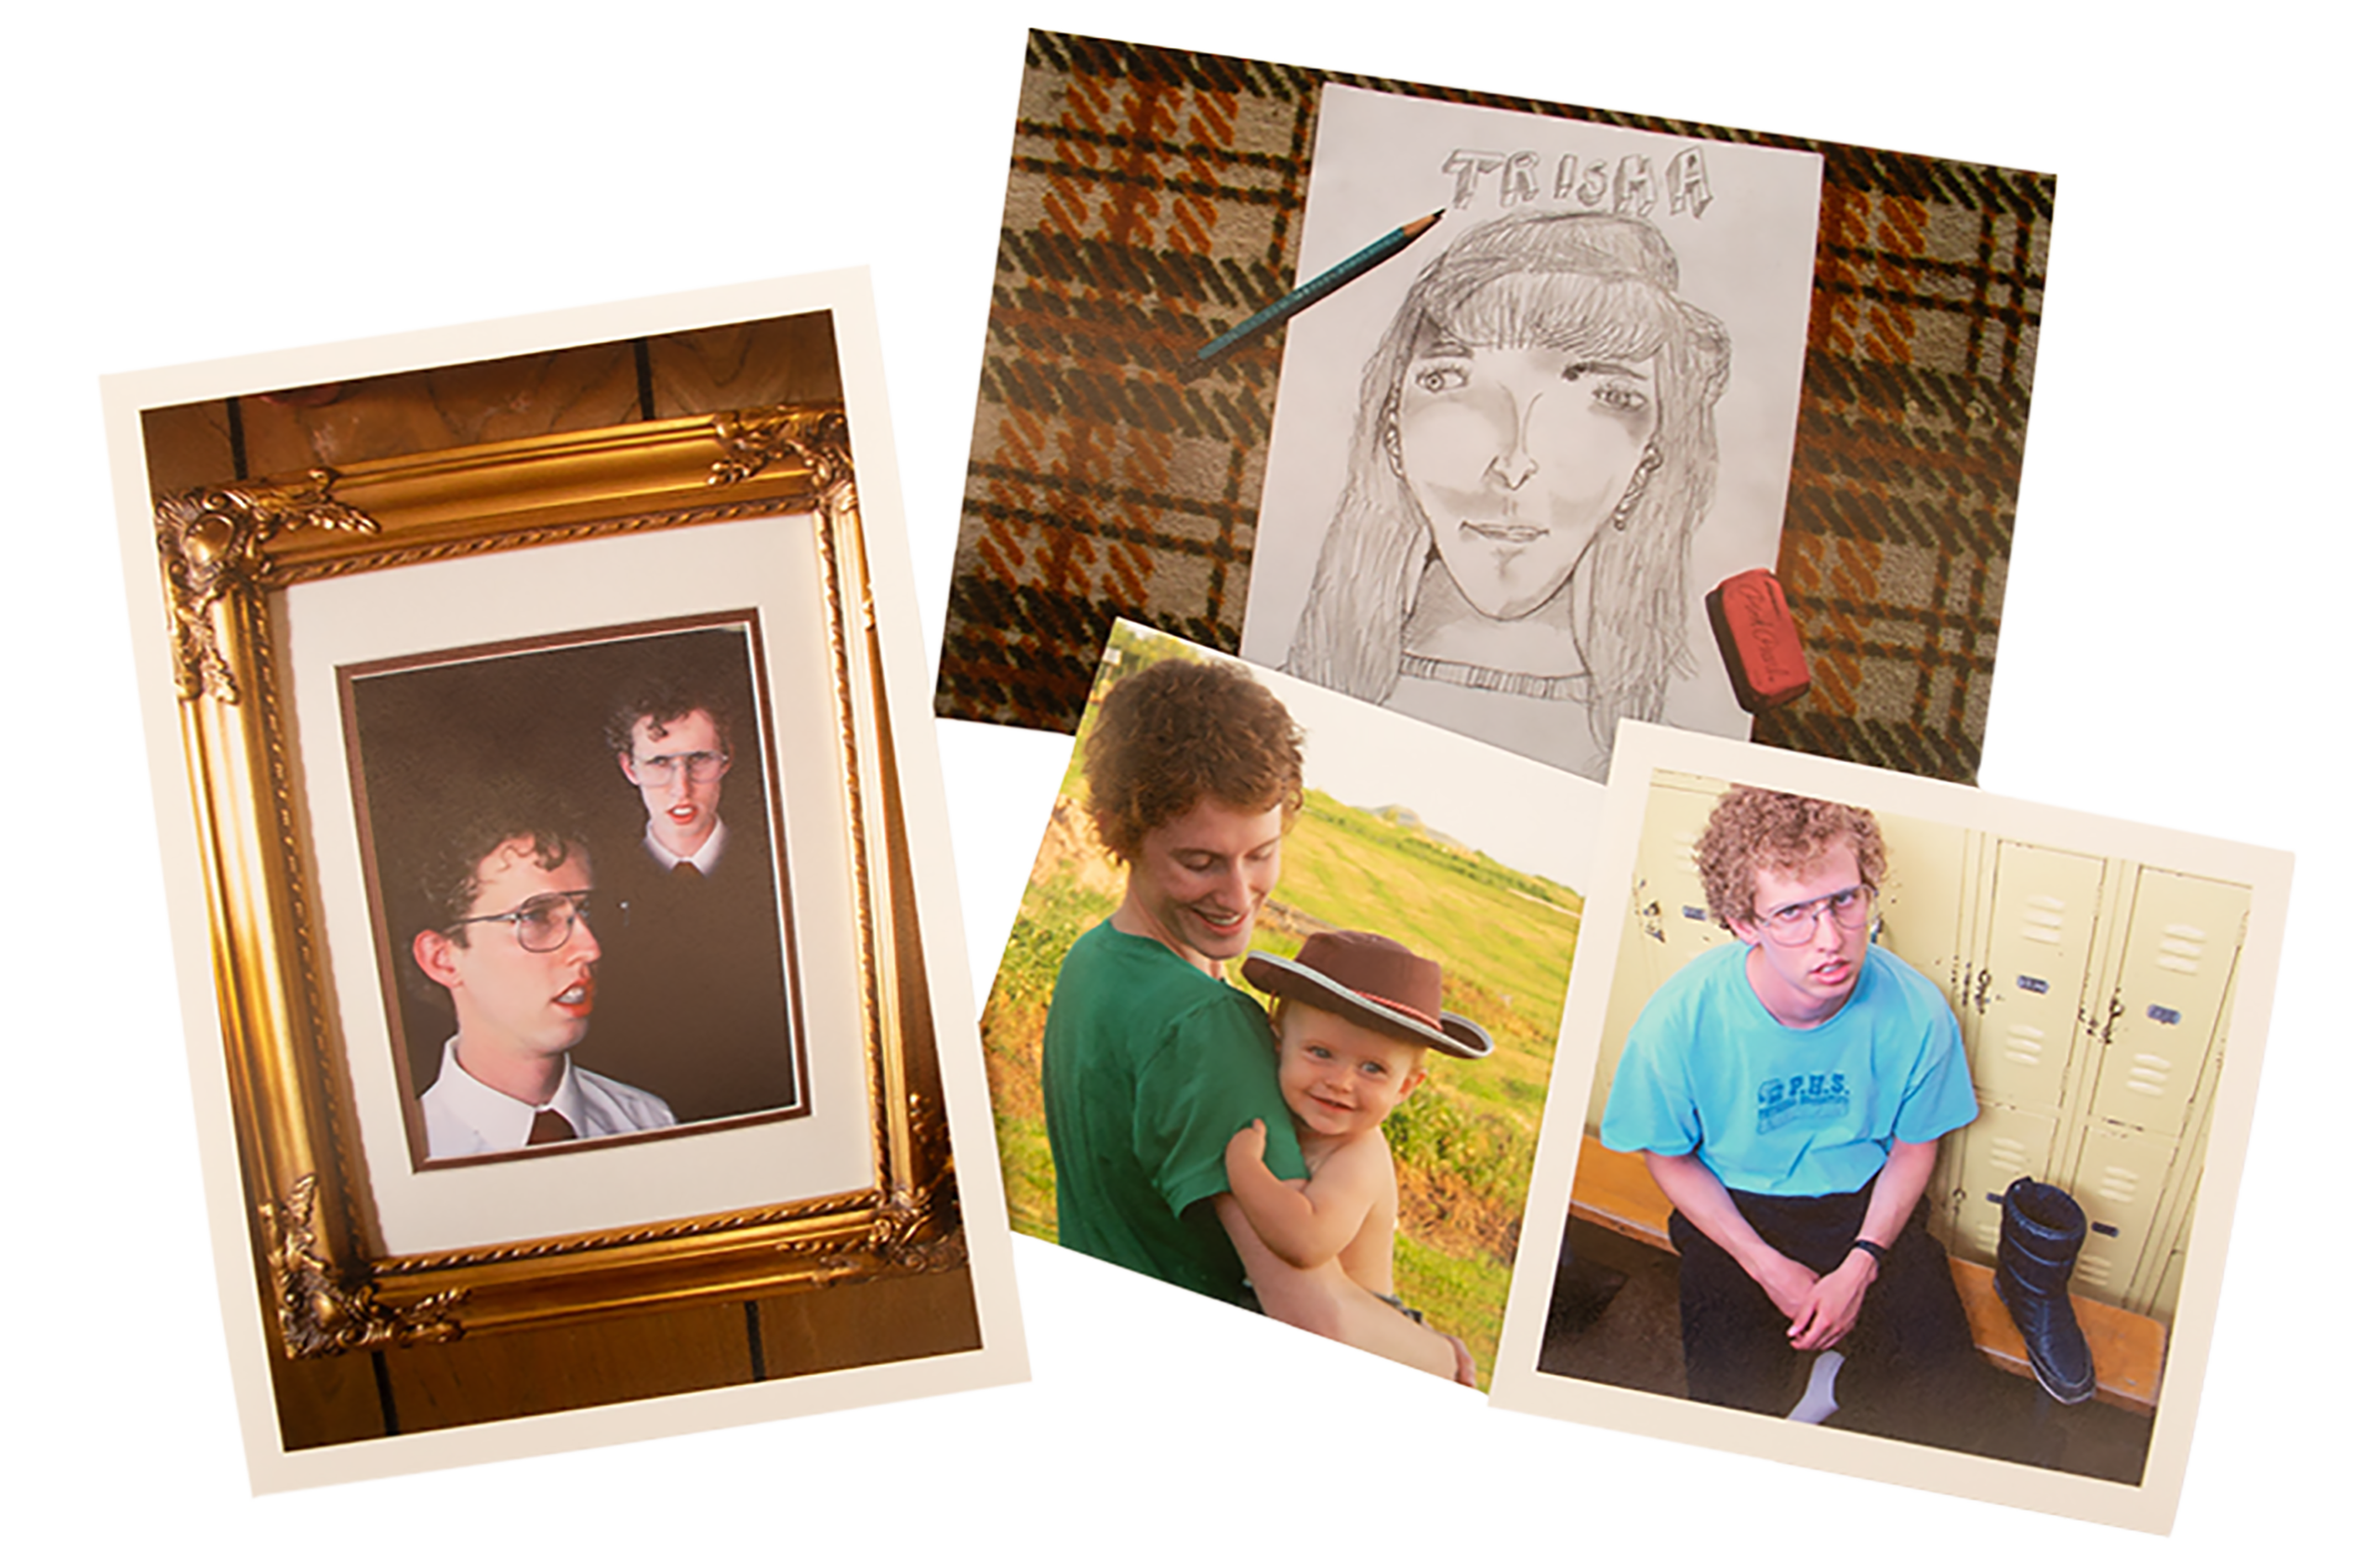 A group of photos. One shows the iconic Sears portrait from the '70s of Napoleon that hangs in his house in the moive. Another is a photo of the sketch Napoleon draws of Trisha and uses to ask her to the dance. Another photo shows Jerusha Hess holding her infant son in arms on set. Another photo shows Napoleon sitting in the locker room next to his moon boots.